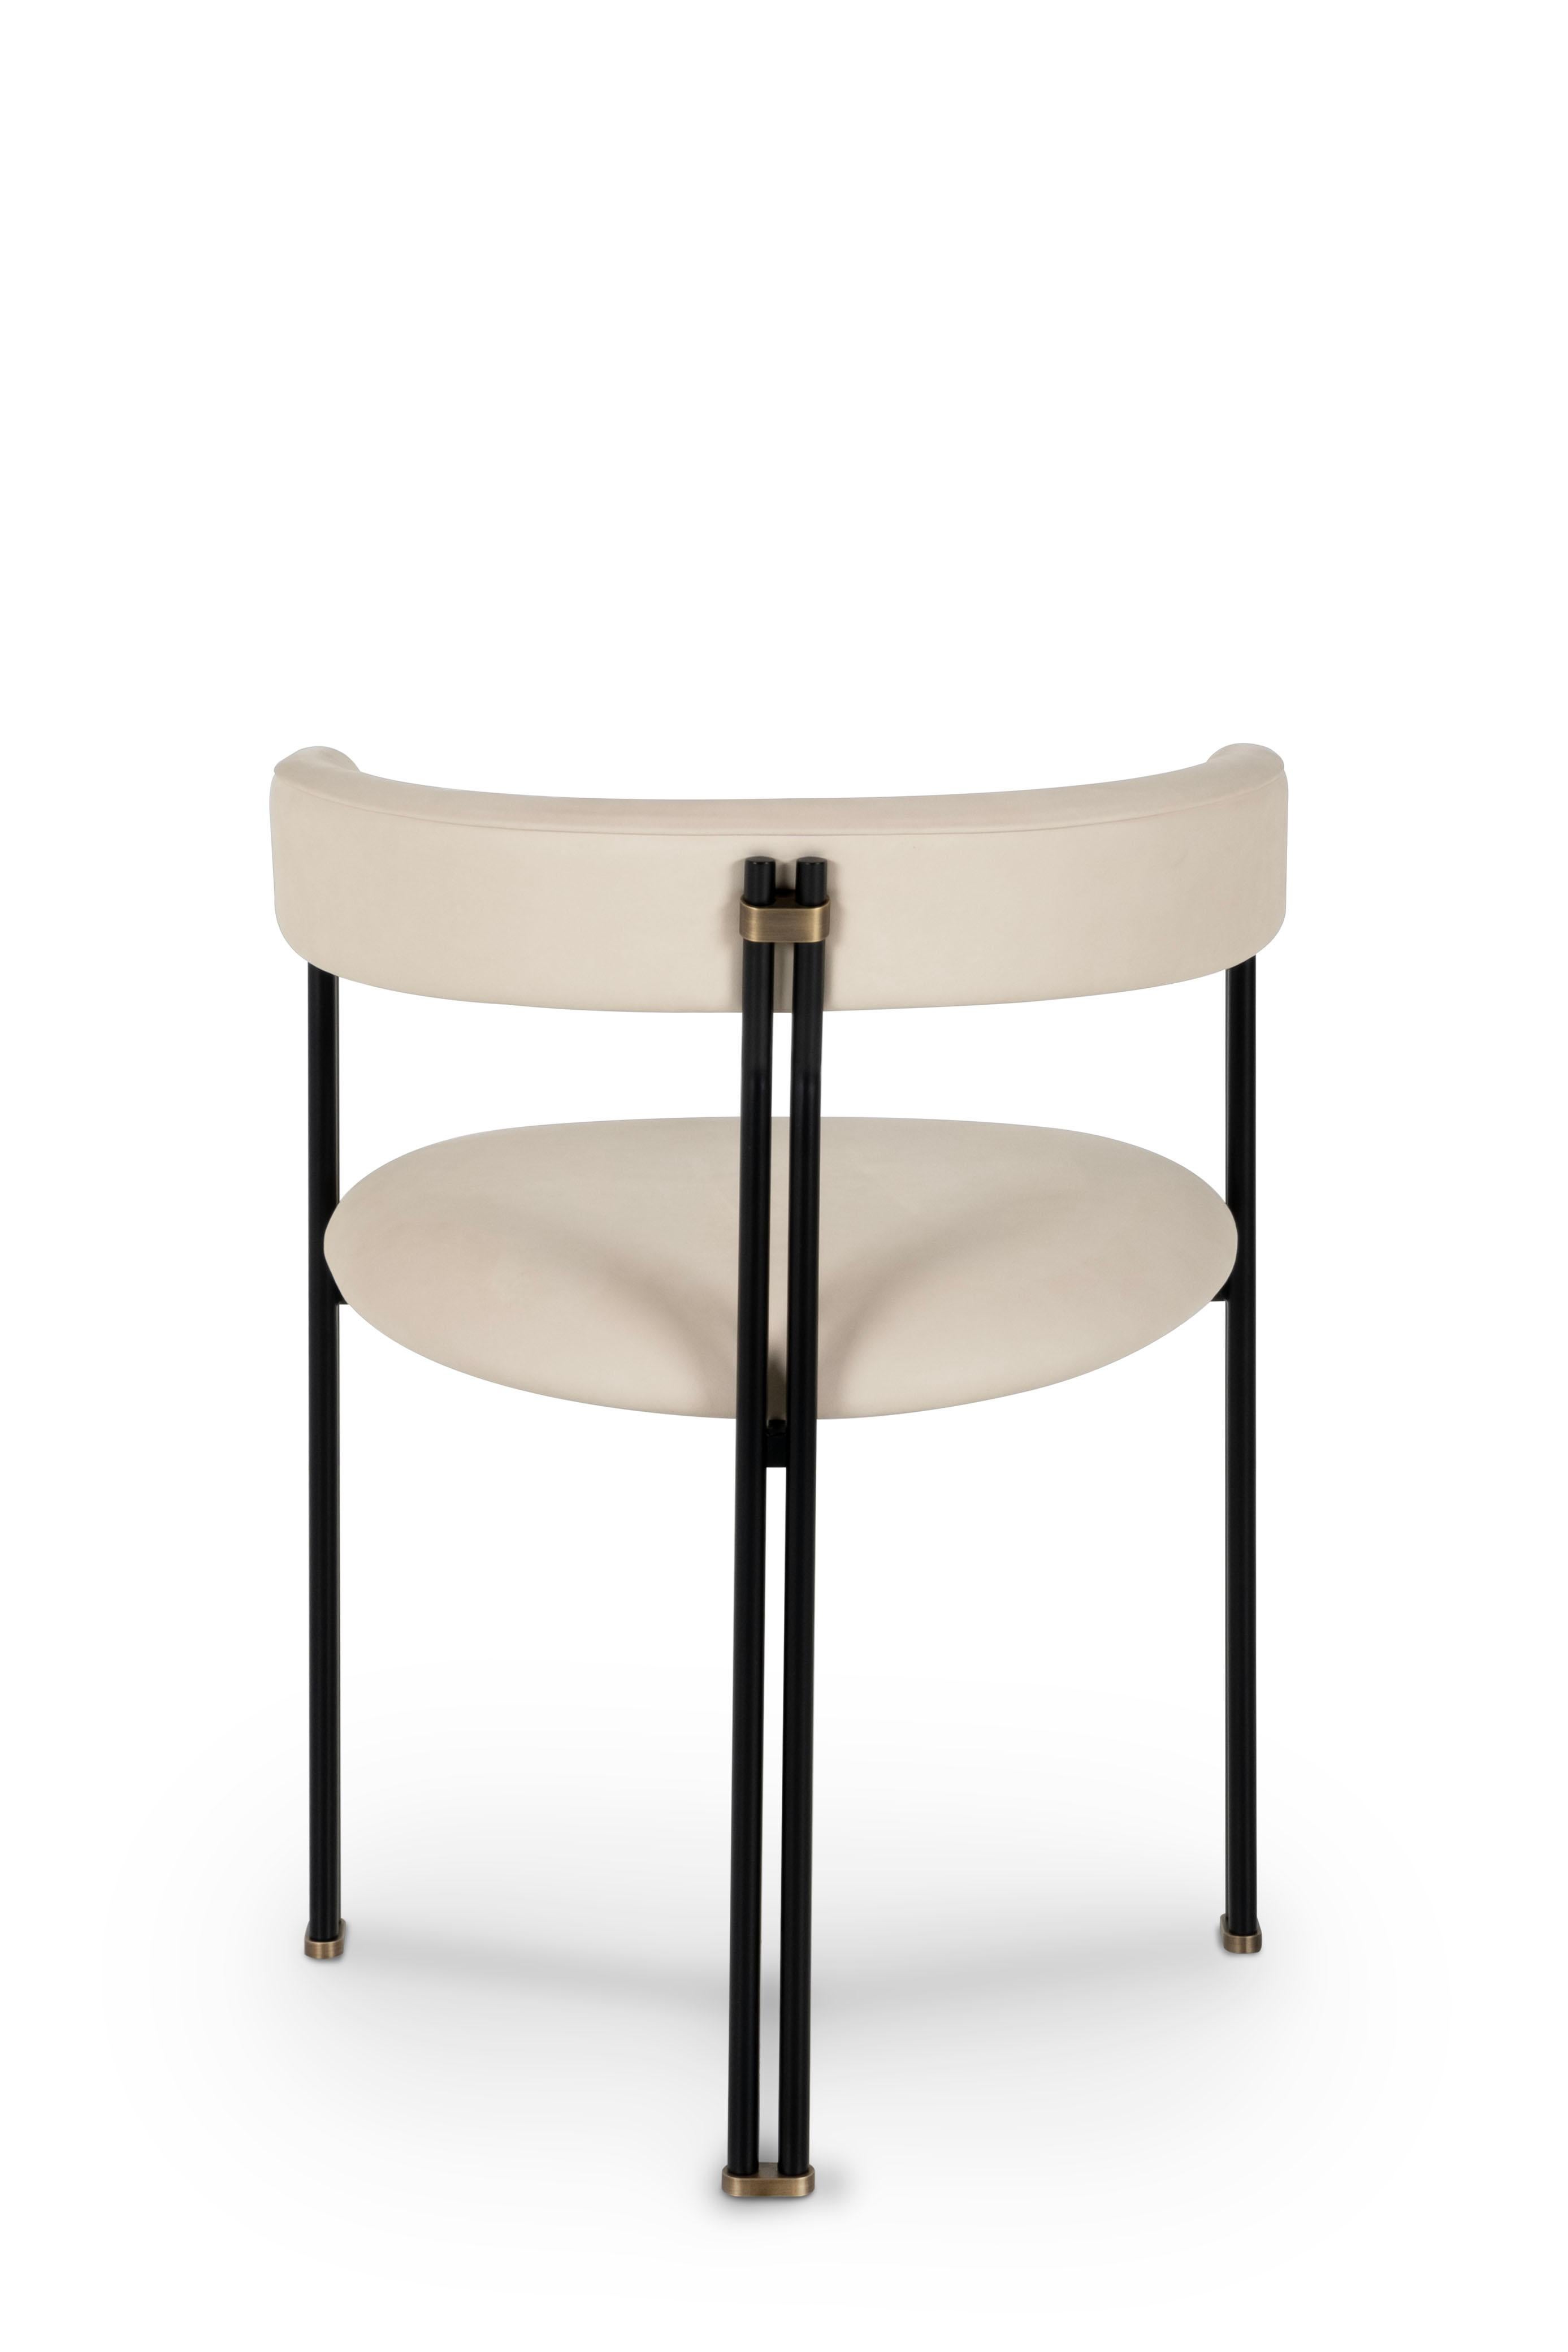 Contemporary Modern Maia Dining Chair, Beige Italian Leather, Handmade Portugal by Greenapple For Sale